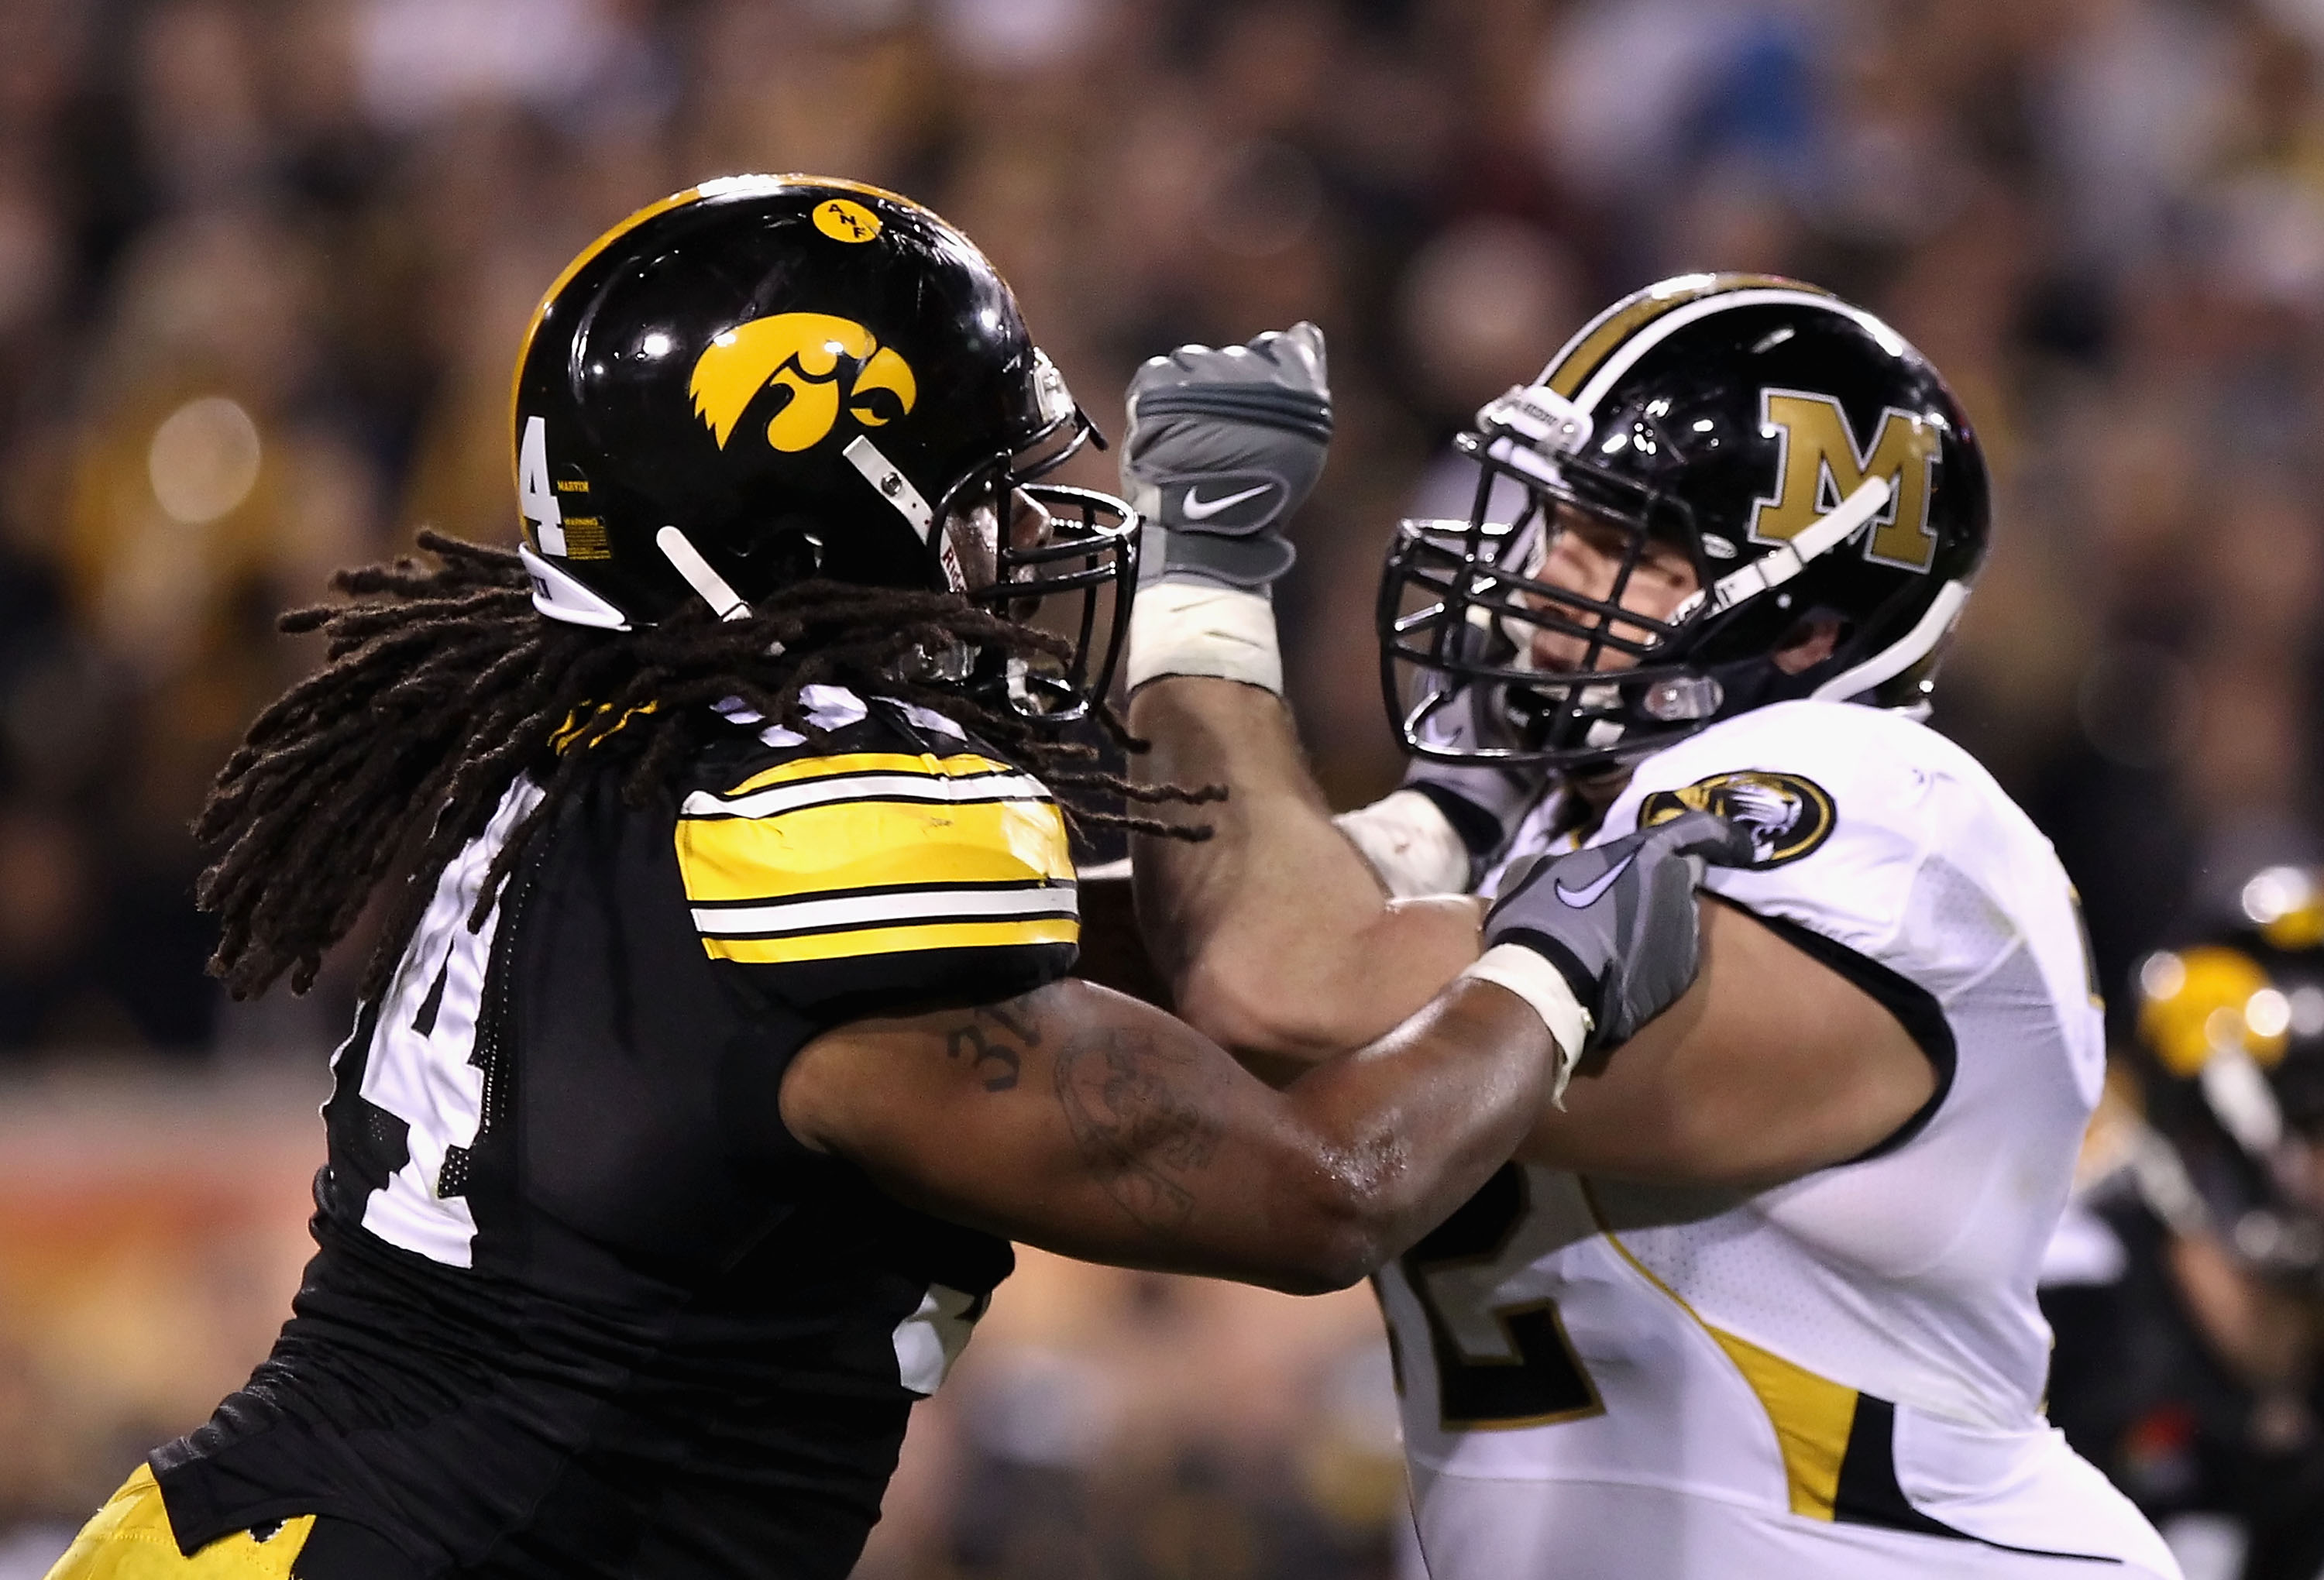 TEMPE, AZ - DECEMBER 28:  Defensive end Adrian Clayborn #94 of the Iowa Hawkeyes in action during the Insight Bowl against the Missouri Tigers at Sun Devil Stadium on December 28, 2010 in Tempe, Arizona. The Hawkeyes defeated the Tigers 27-24.  (Photo by